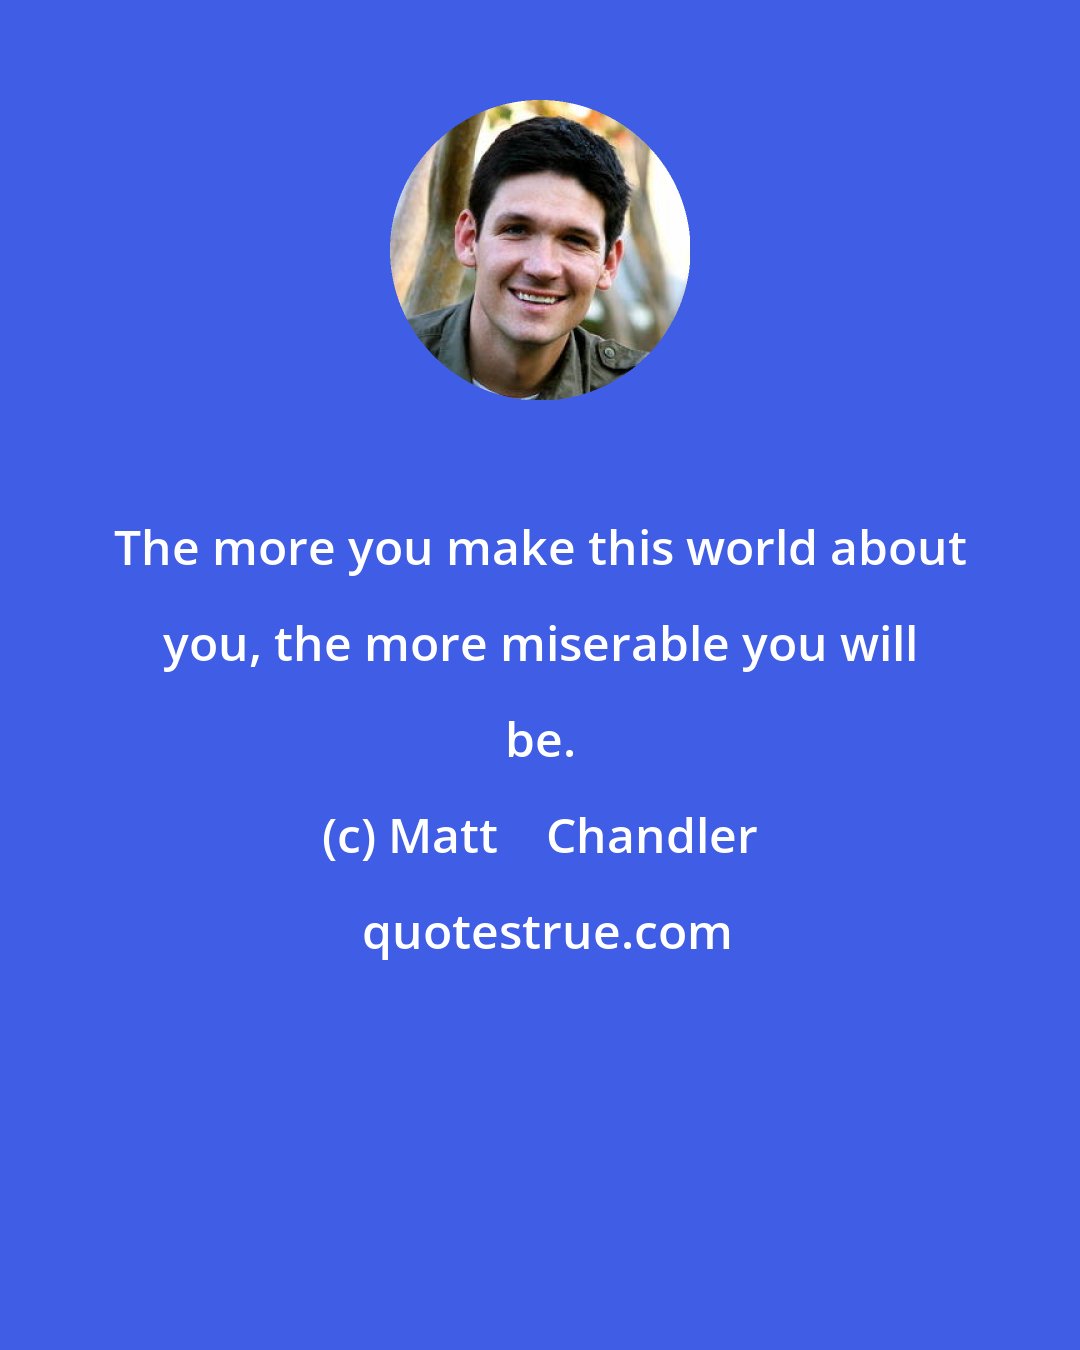 Matt    Chandler: The more you make this world about you, the more miserable you will be.